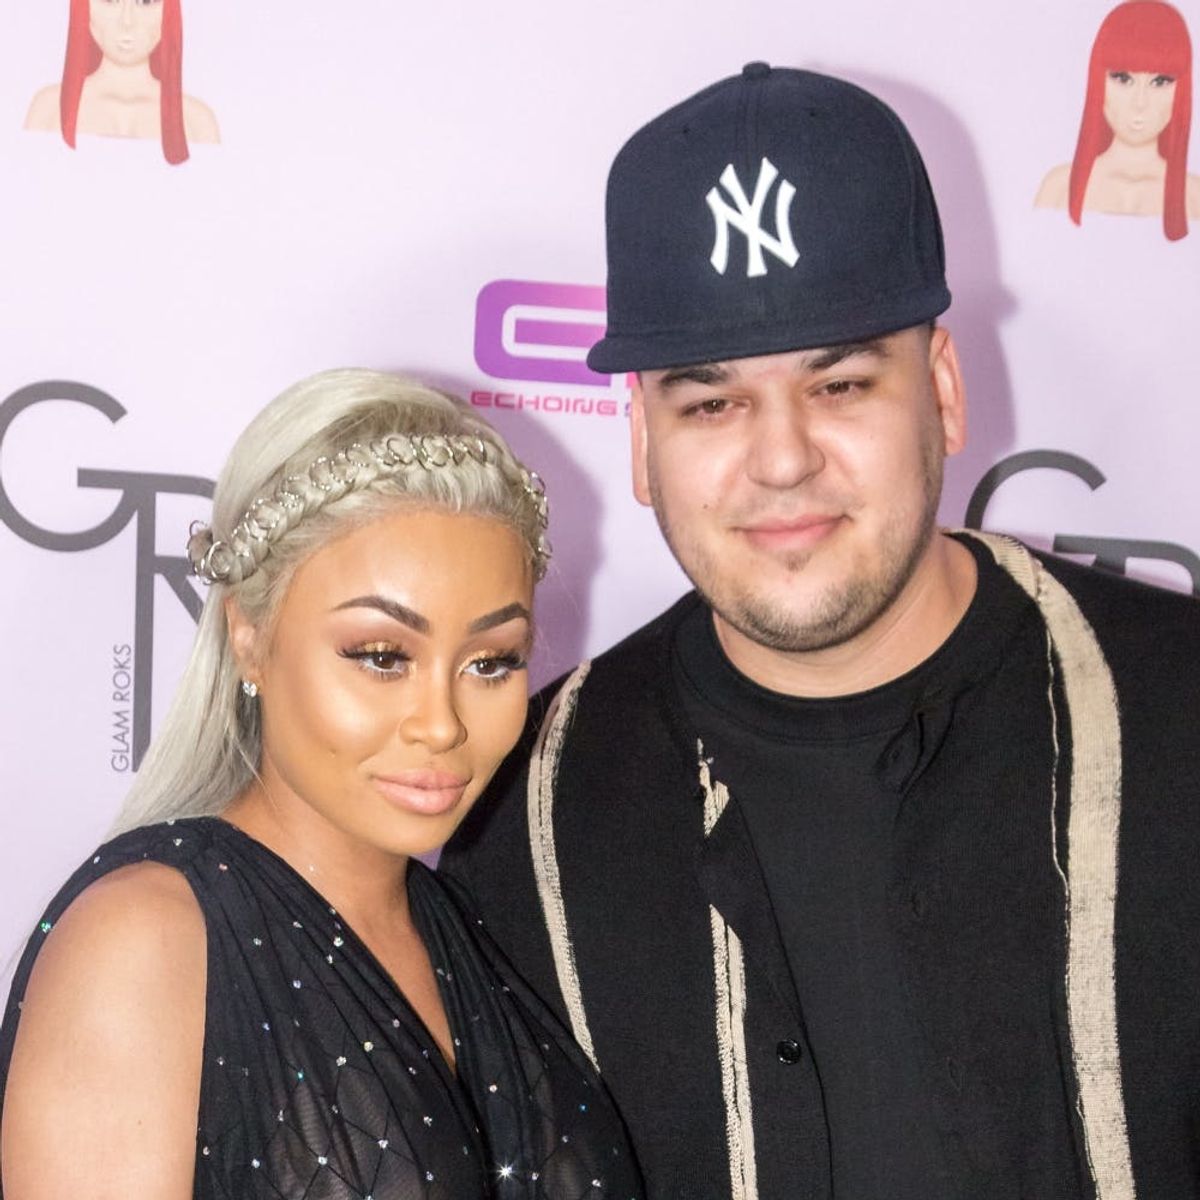 Blac Chyna and Rob Kardashian Just Shared the First Sonogram of their Baby Girl